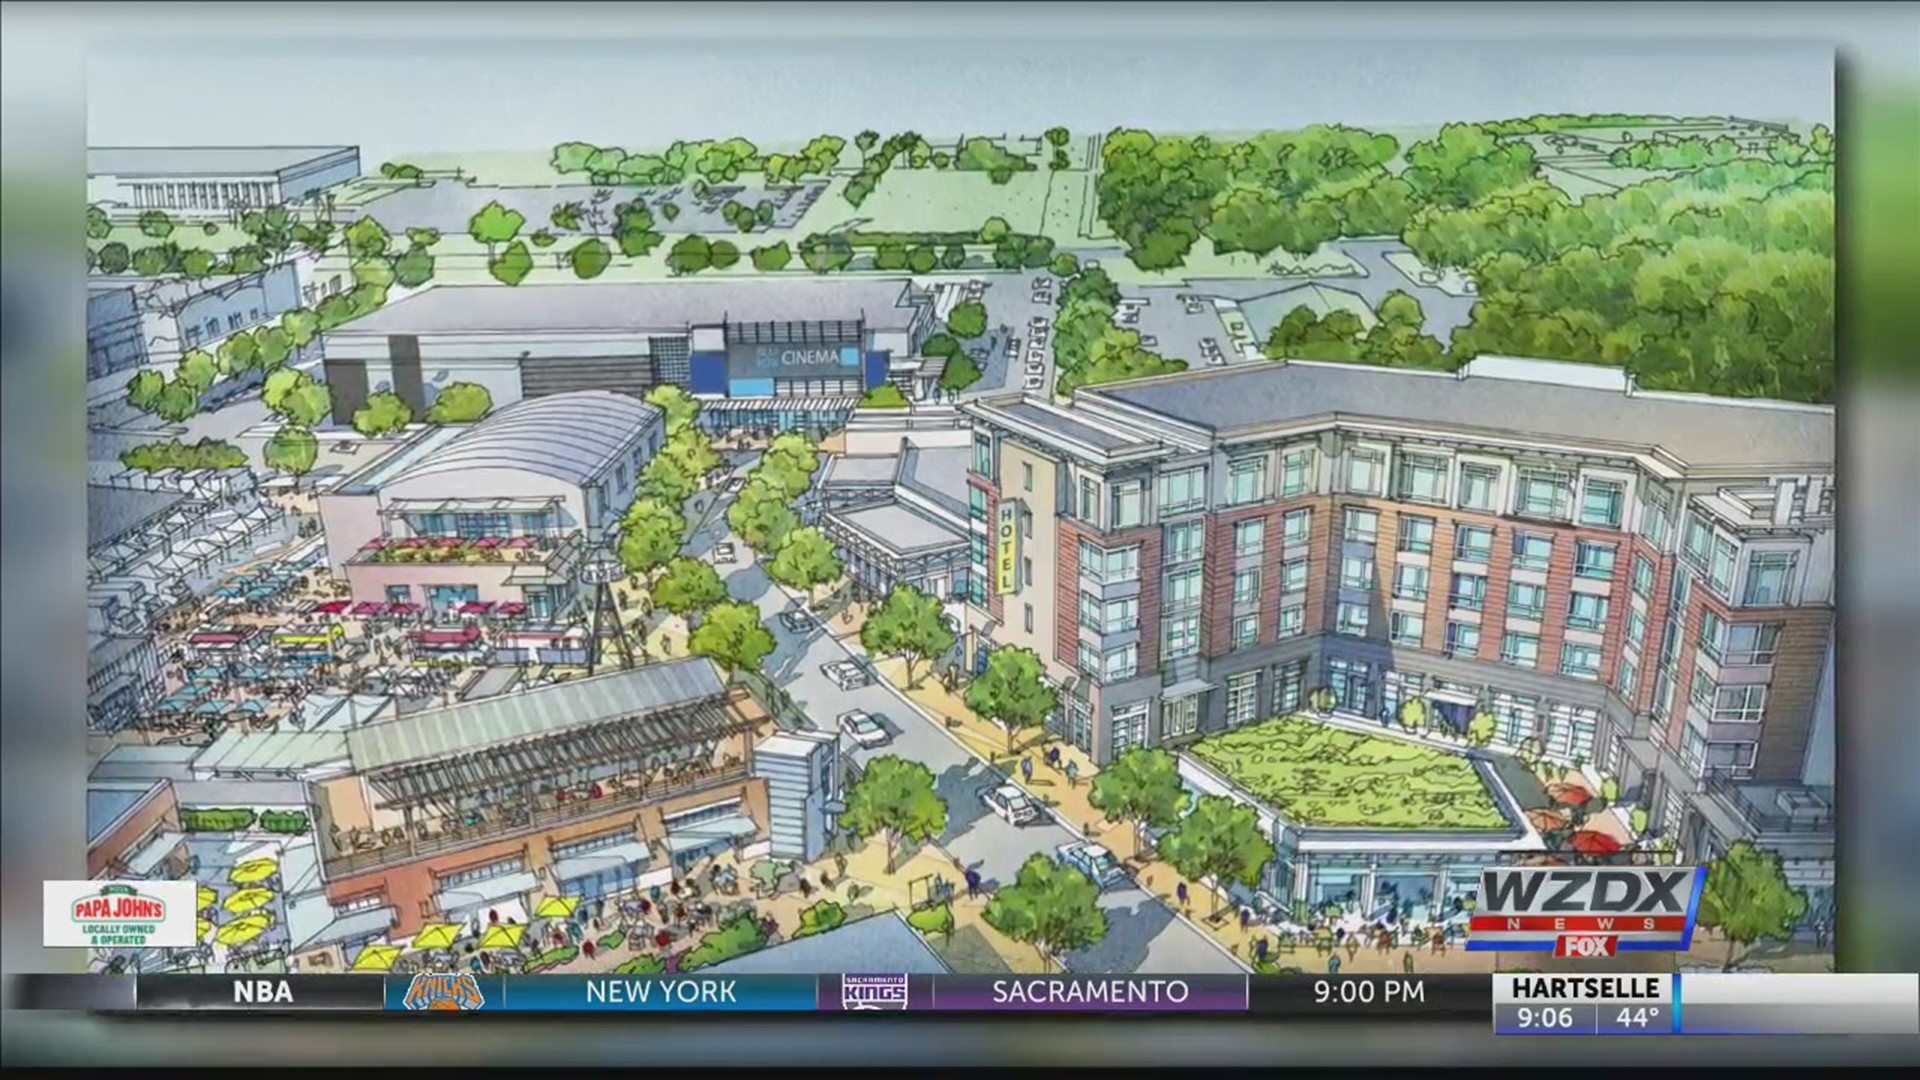 Touchstar Cinemas is bringing a brand new movie theater to Mid City district.